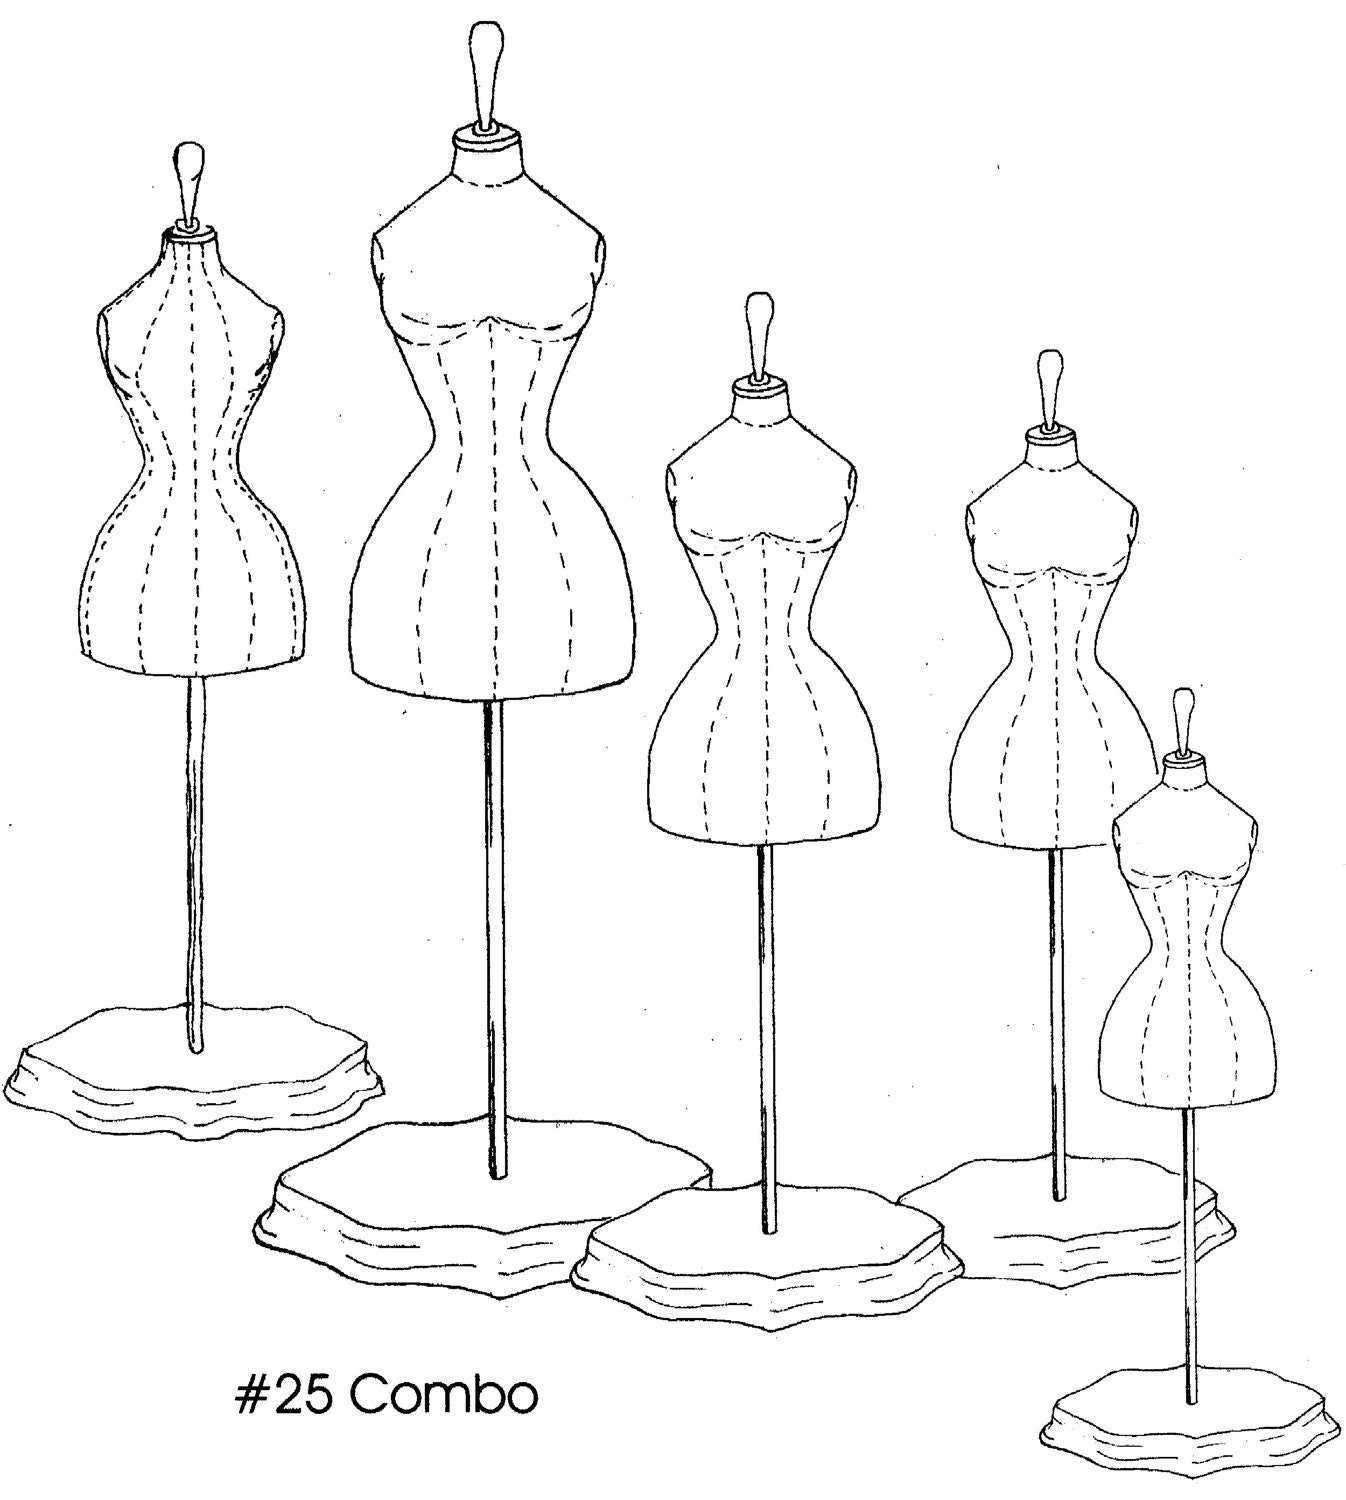 Victorian Doll Dress Form Sewing Pattern with 5 Sizes by digmongin